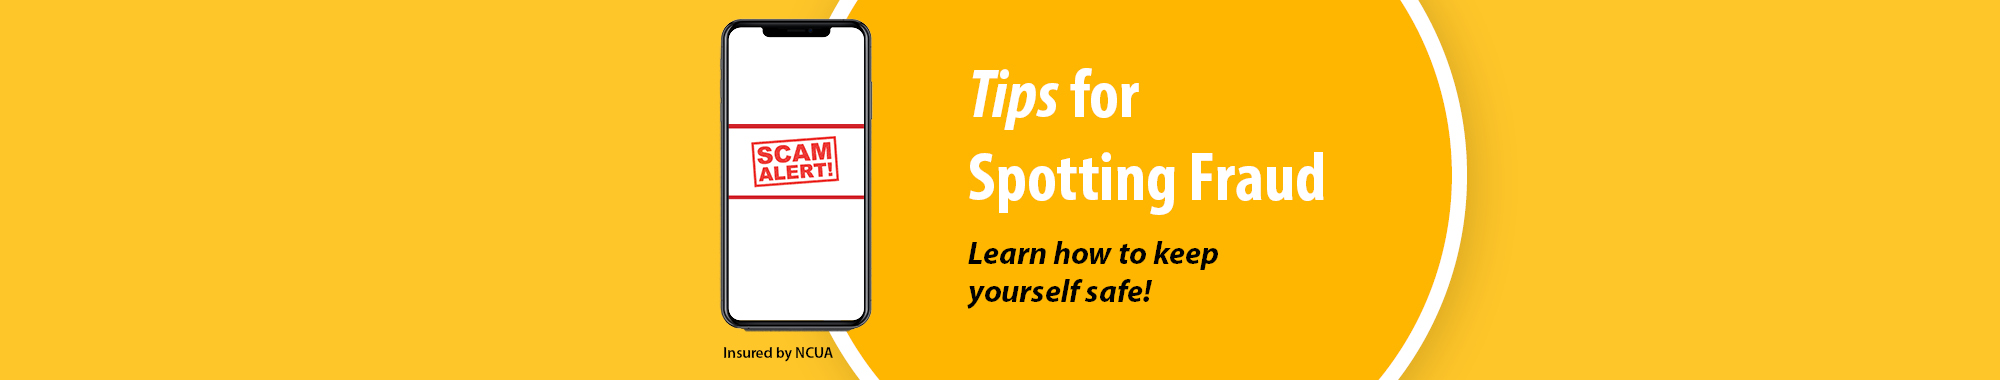 Tips for Spotting Fraud - Learn how to keep yourself safe!